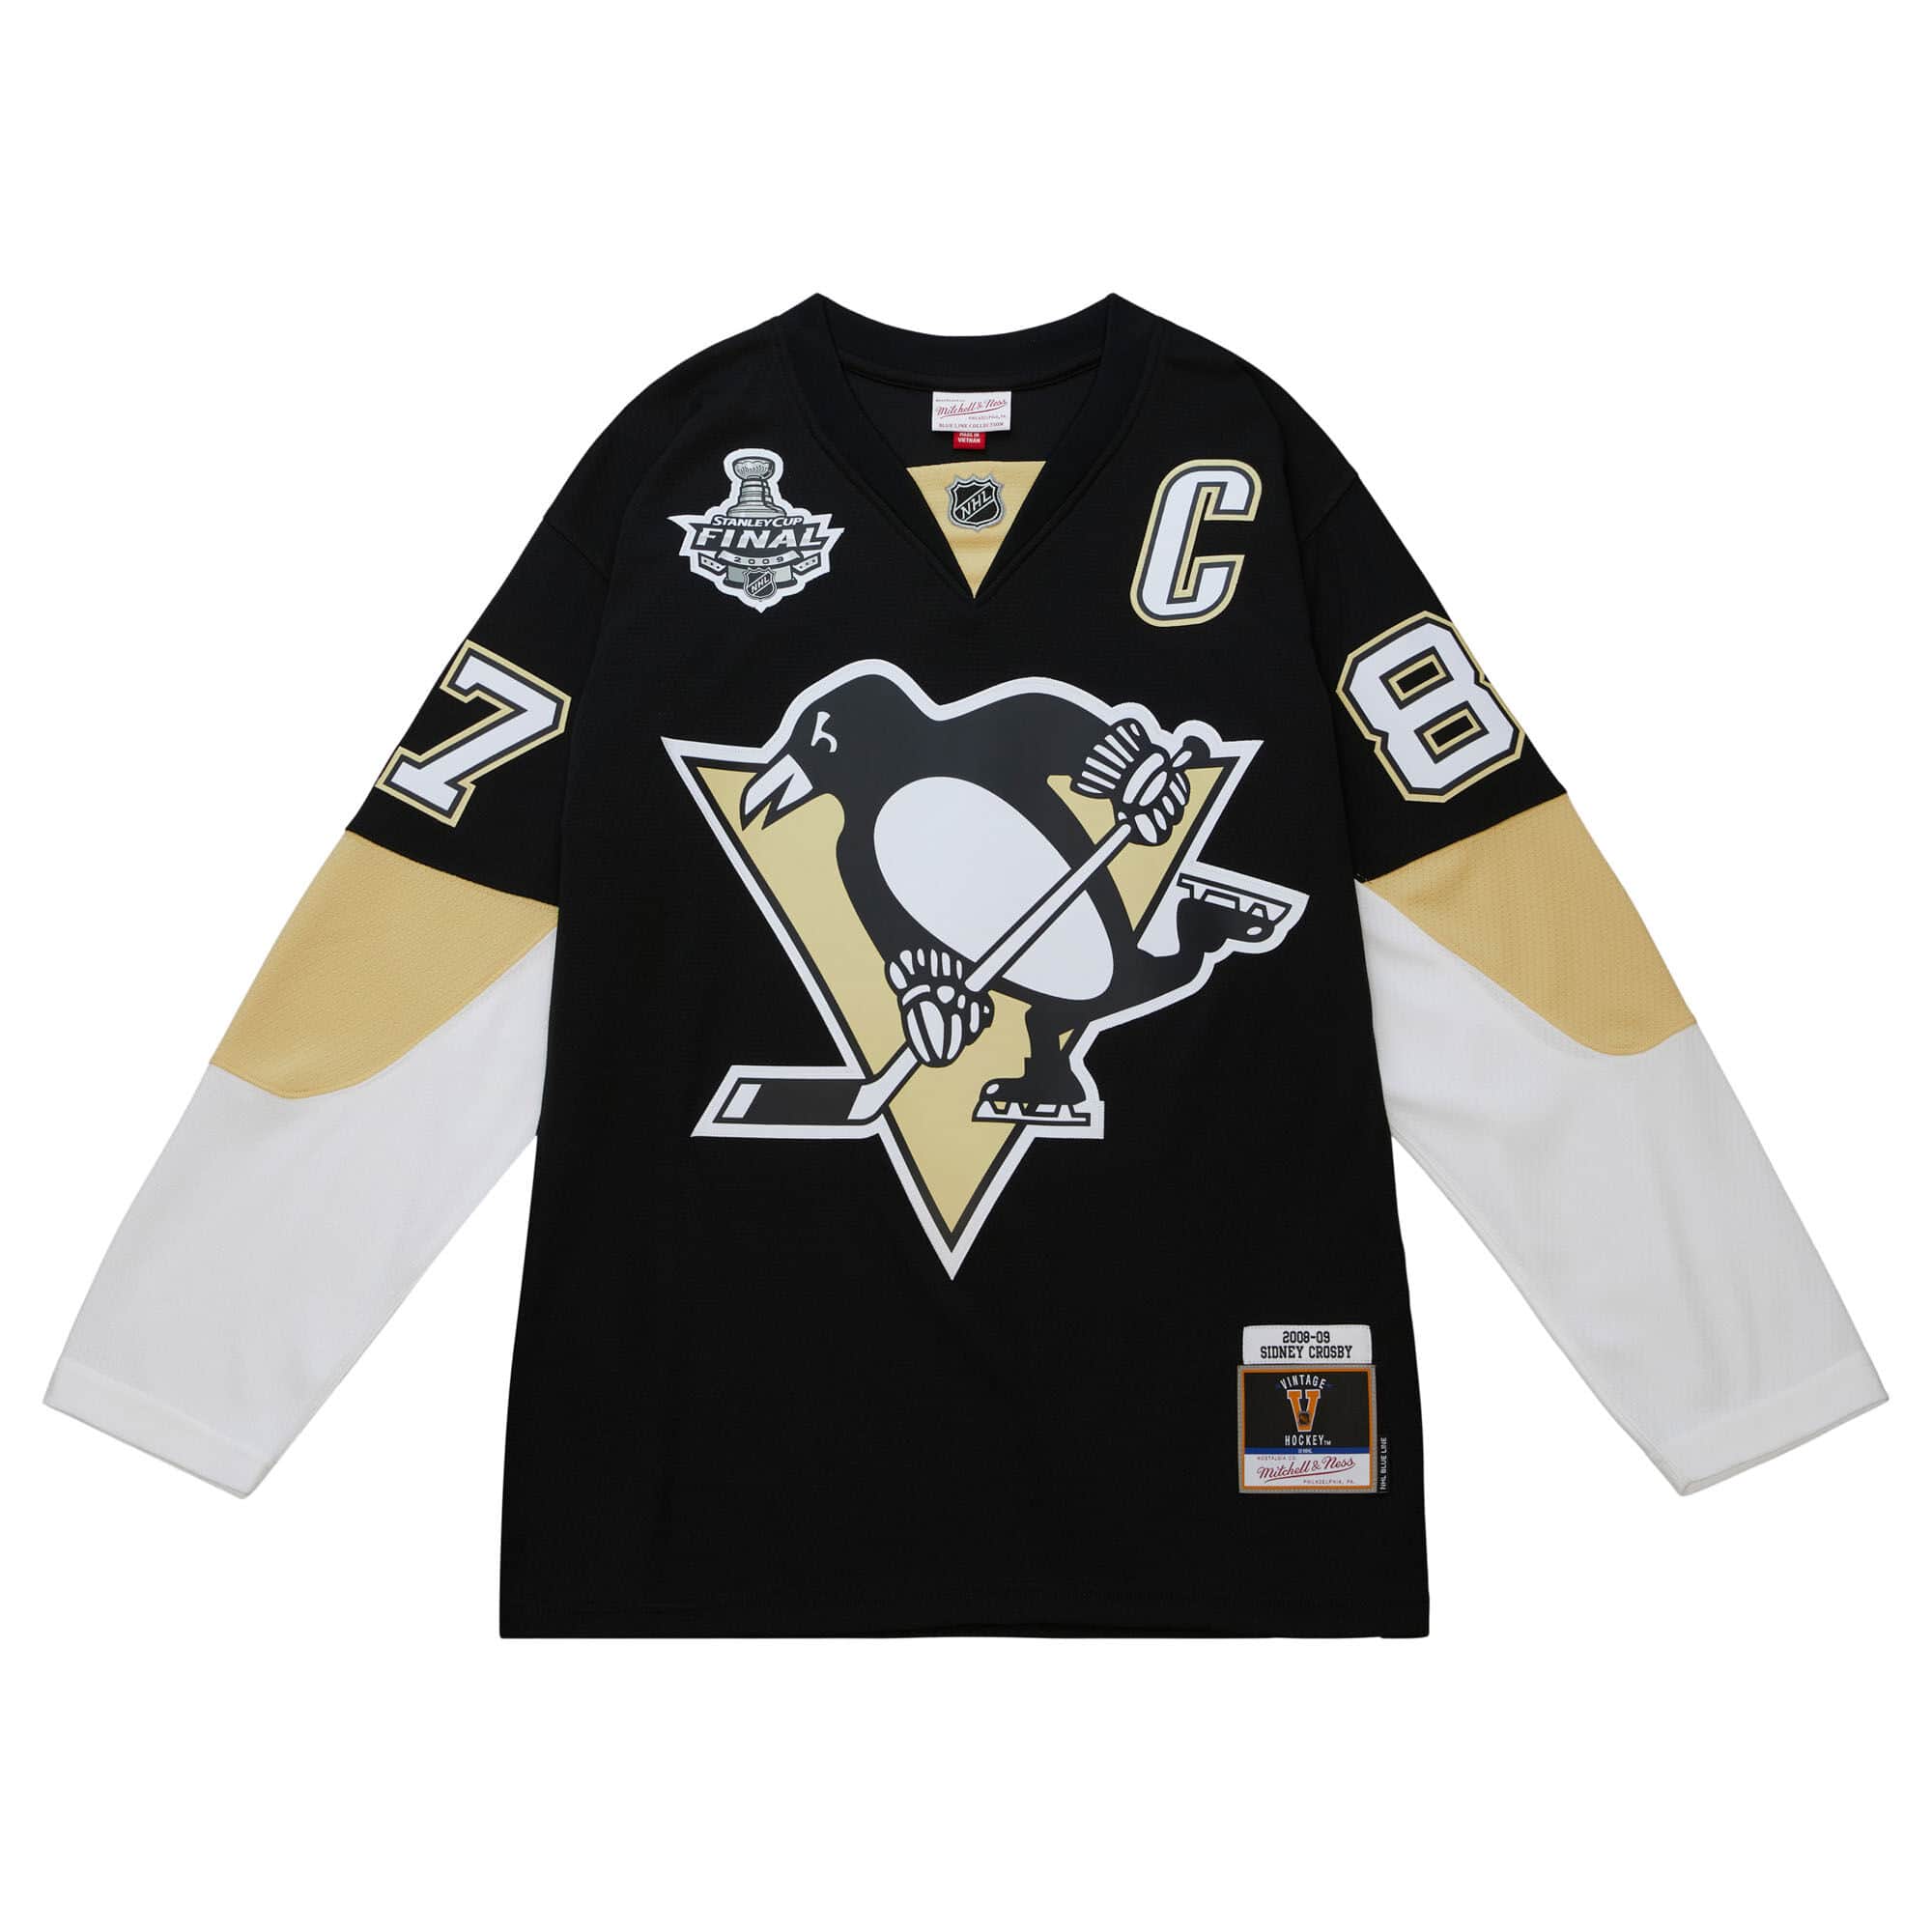 Sidney Crosby Pittsburgh Penguins Home Jersey